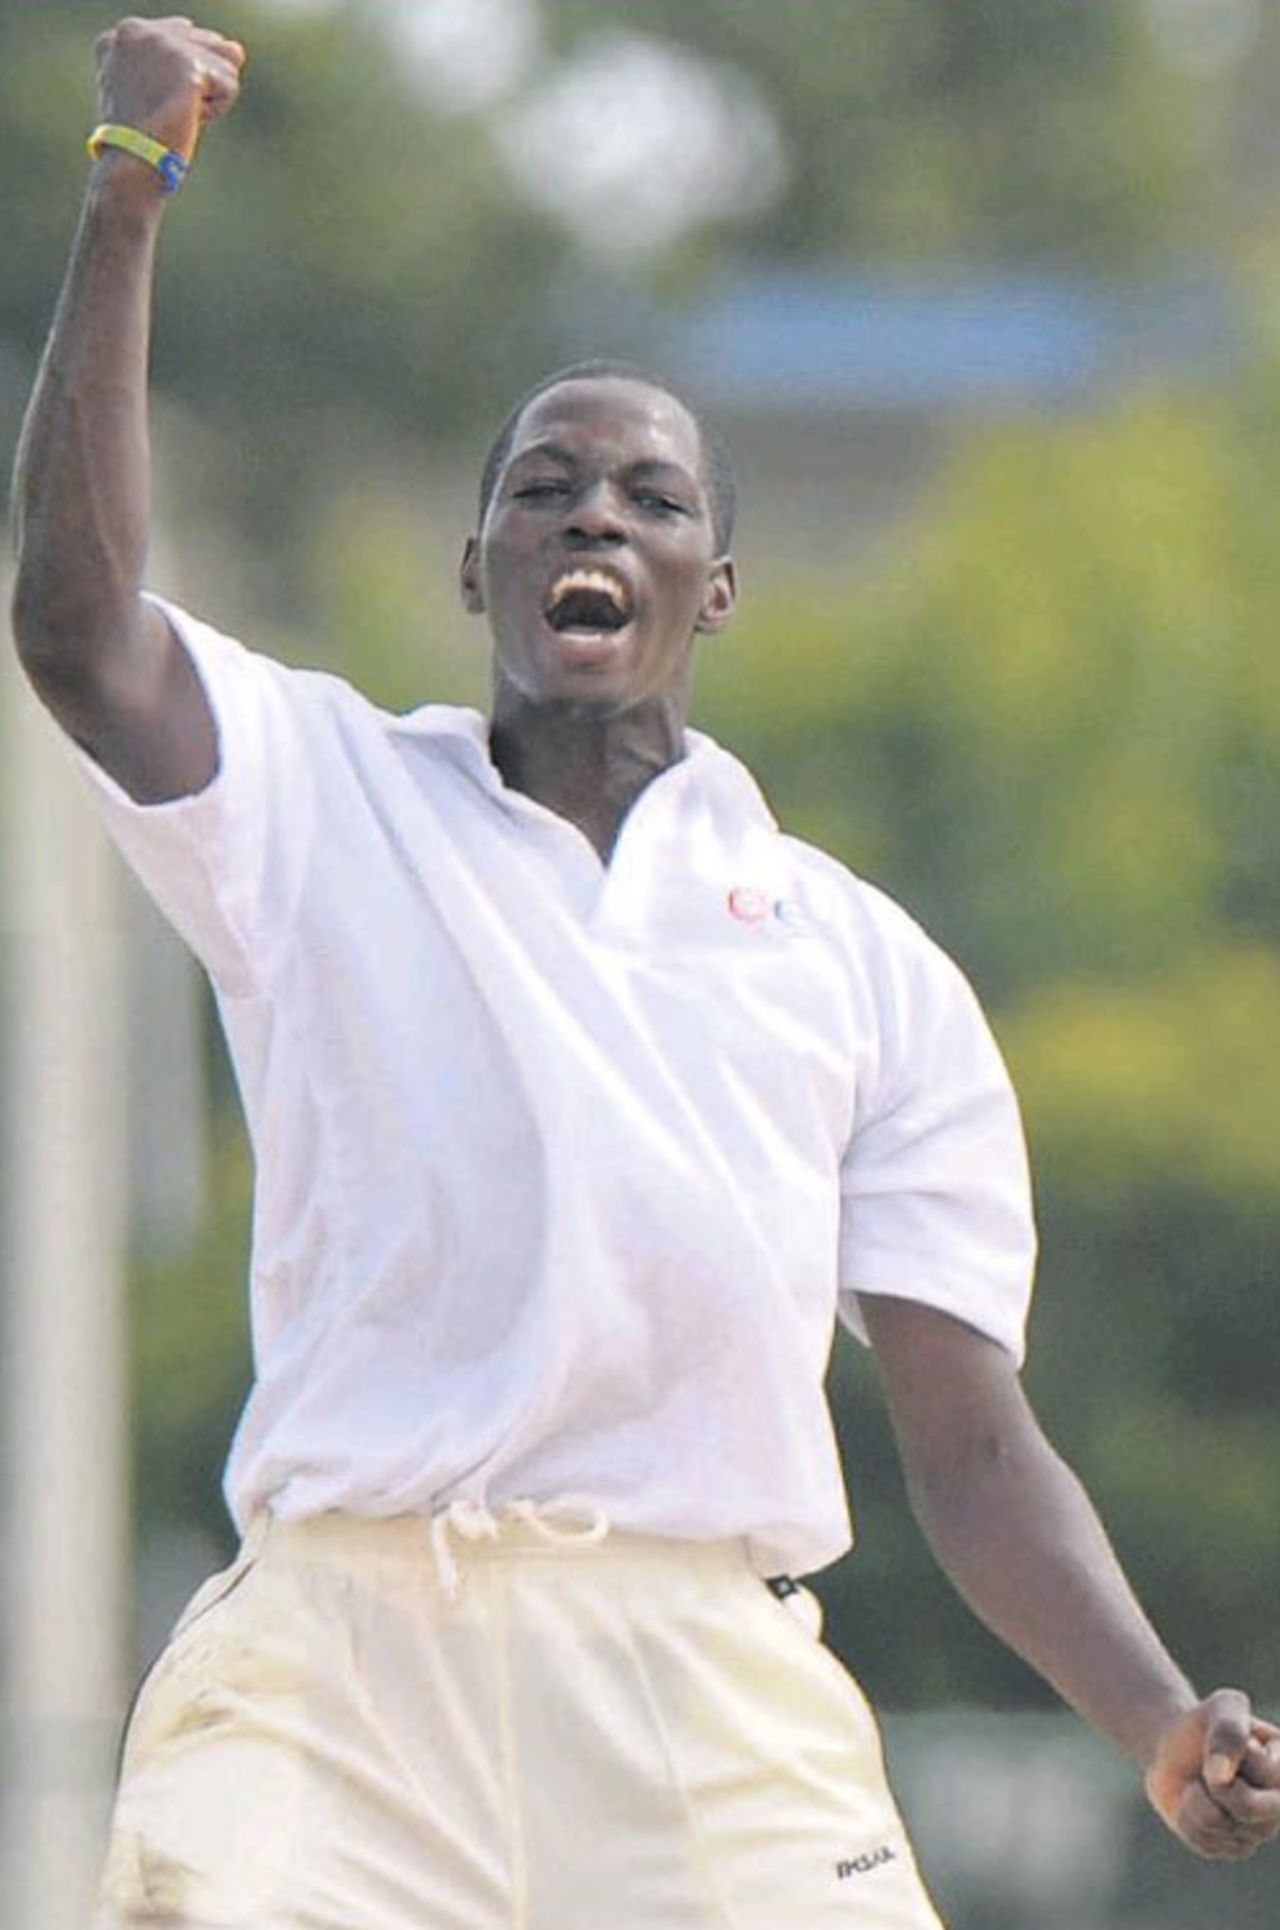 Kevin McClean on his way to 3 for 47, Combined Campuses and Colleges v Guyana, Barbados, January 17, 2009